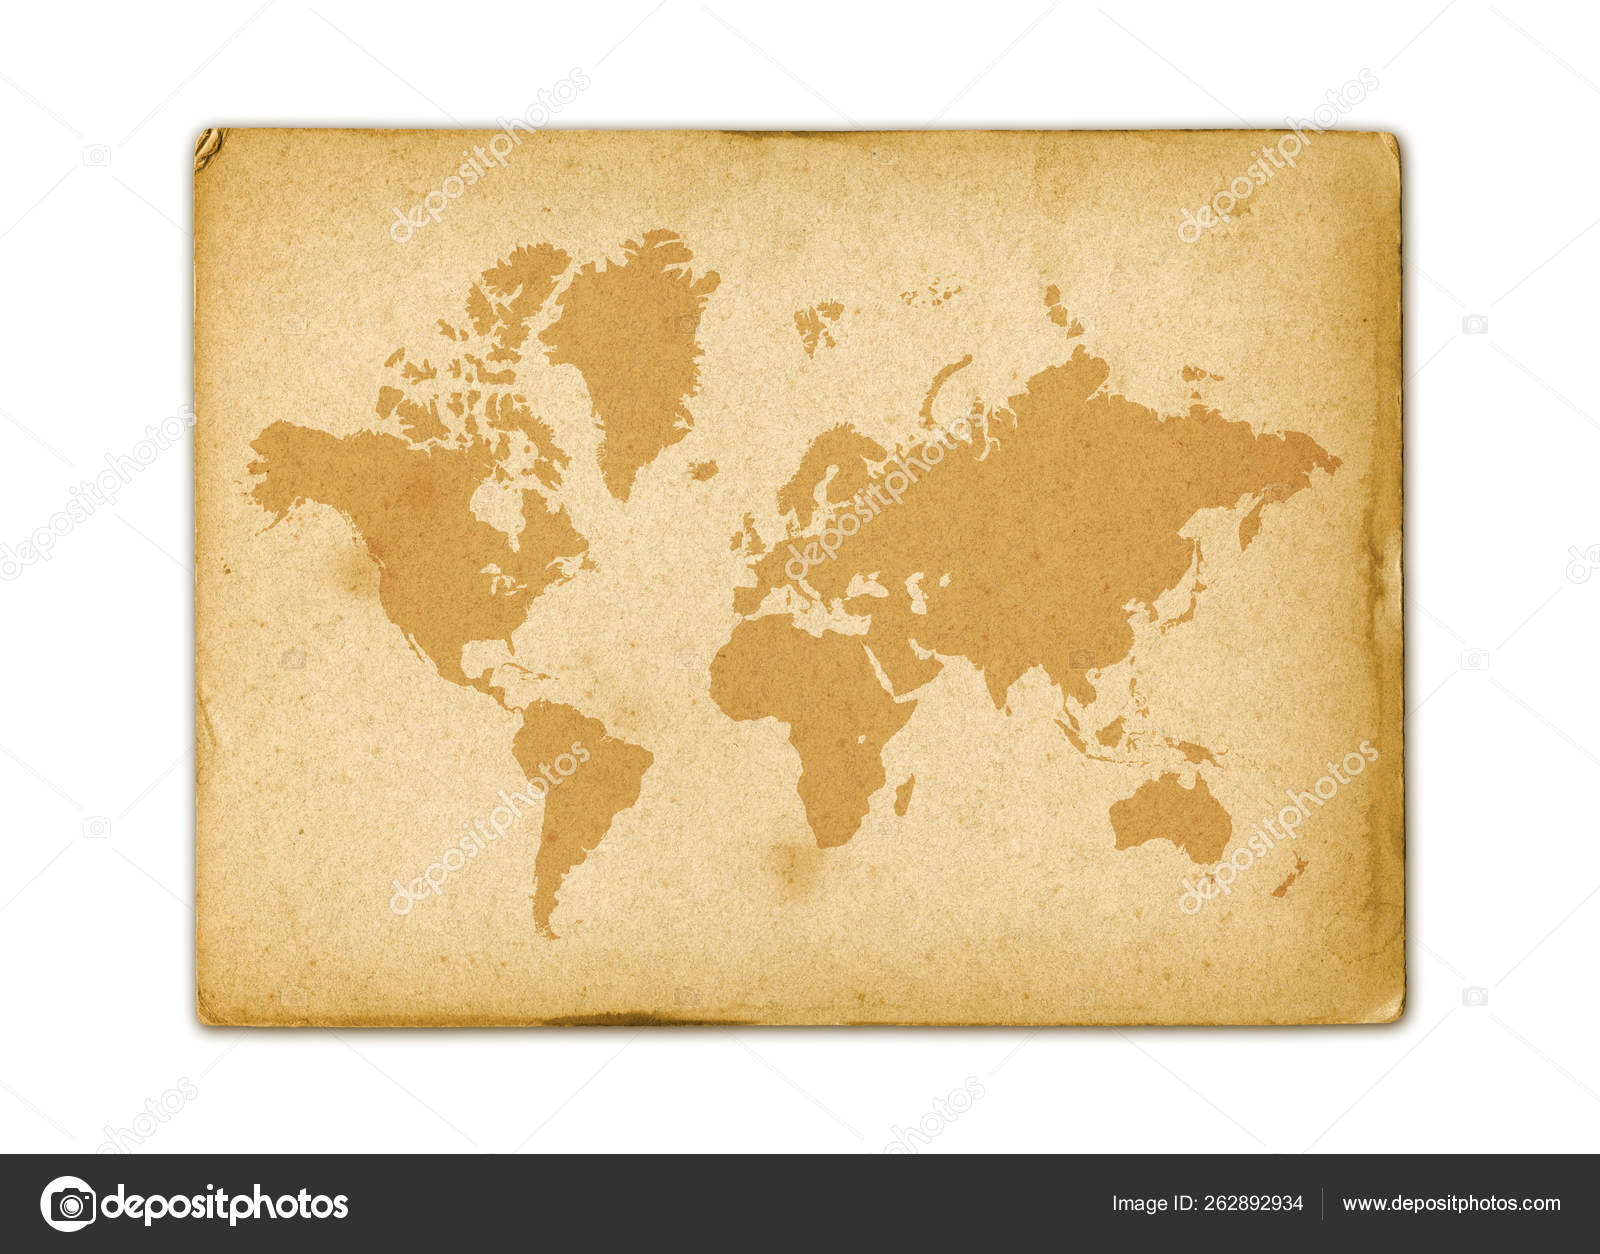 Vintage world map on an old stained parchment Wrapping Paper by